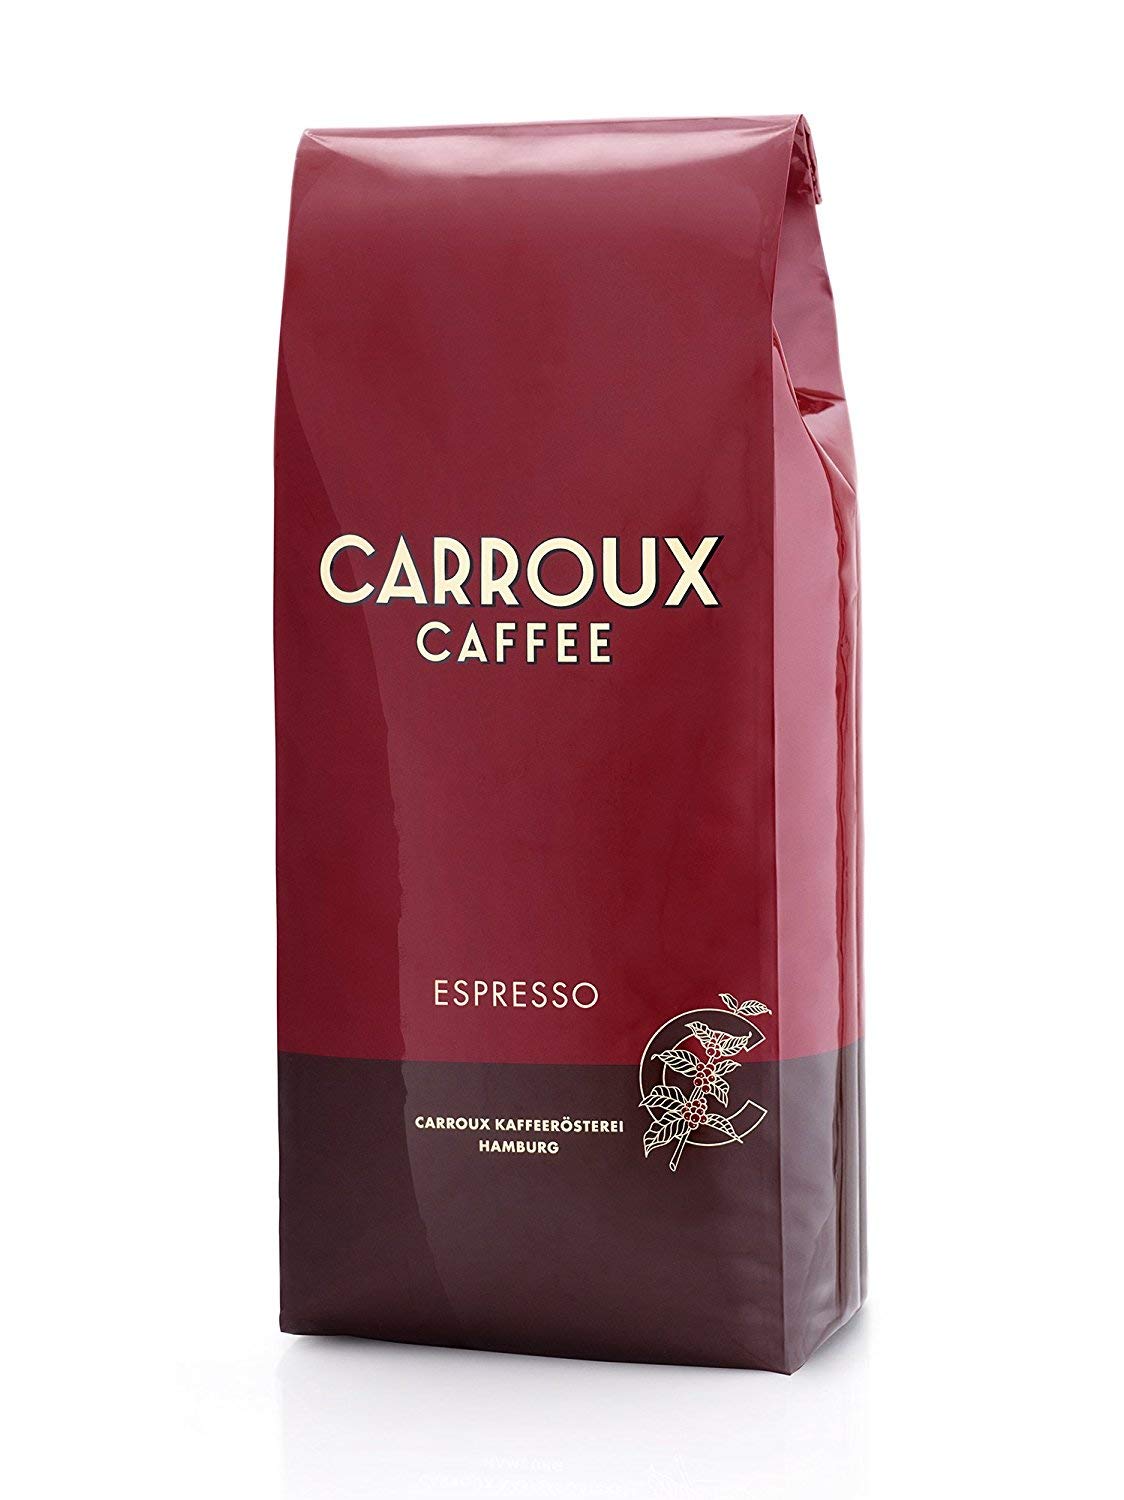 CARROUX Espresso Coffee Beans 1 kg Pack - Finest Premium Coffee - For Fully Automatic Coffee Machine and Portafilter Machine - Whole Beans Freshly Roasted